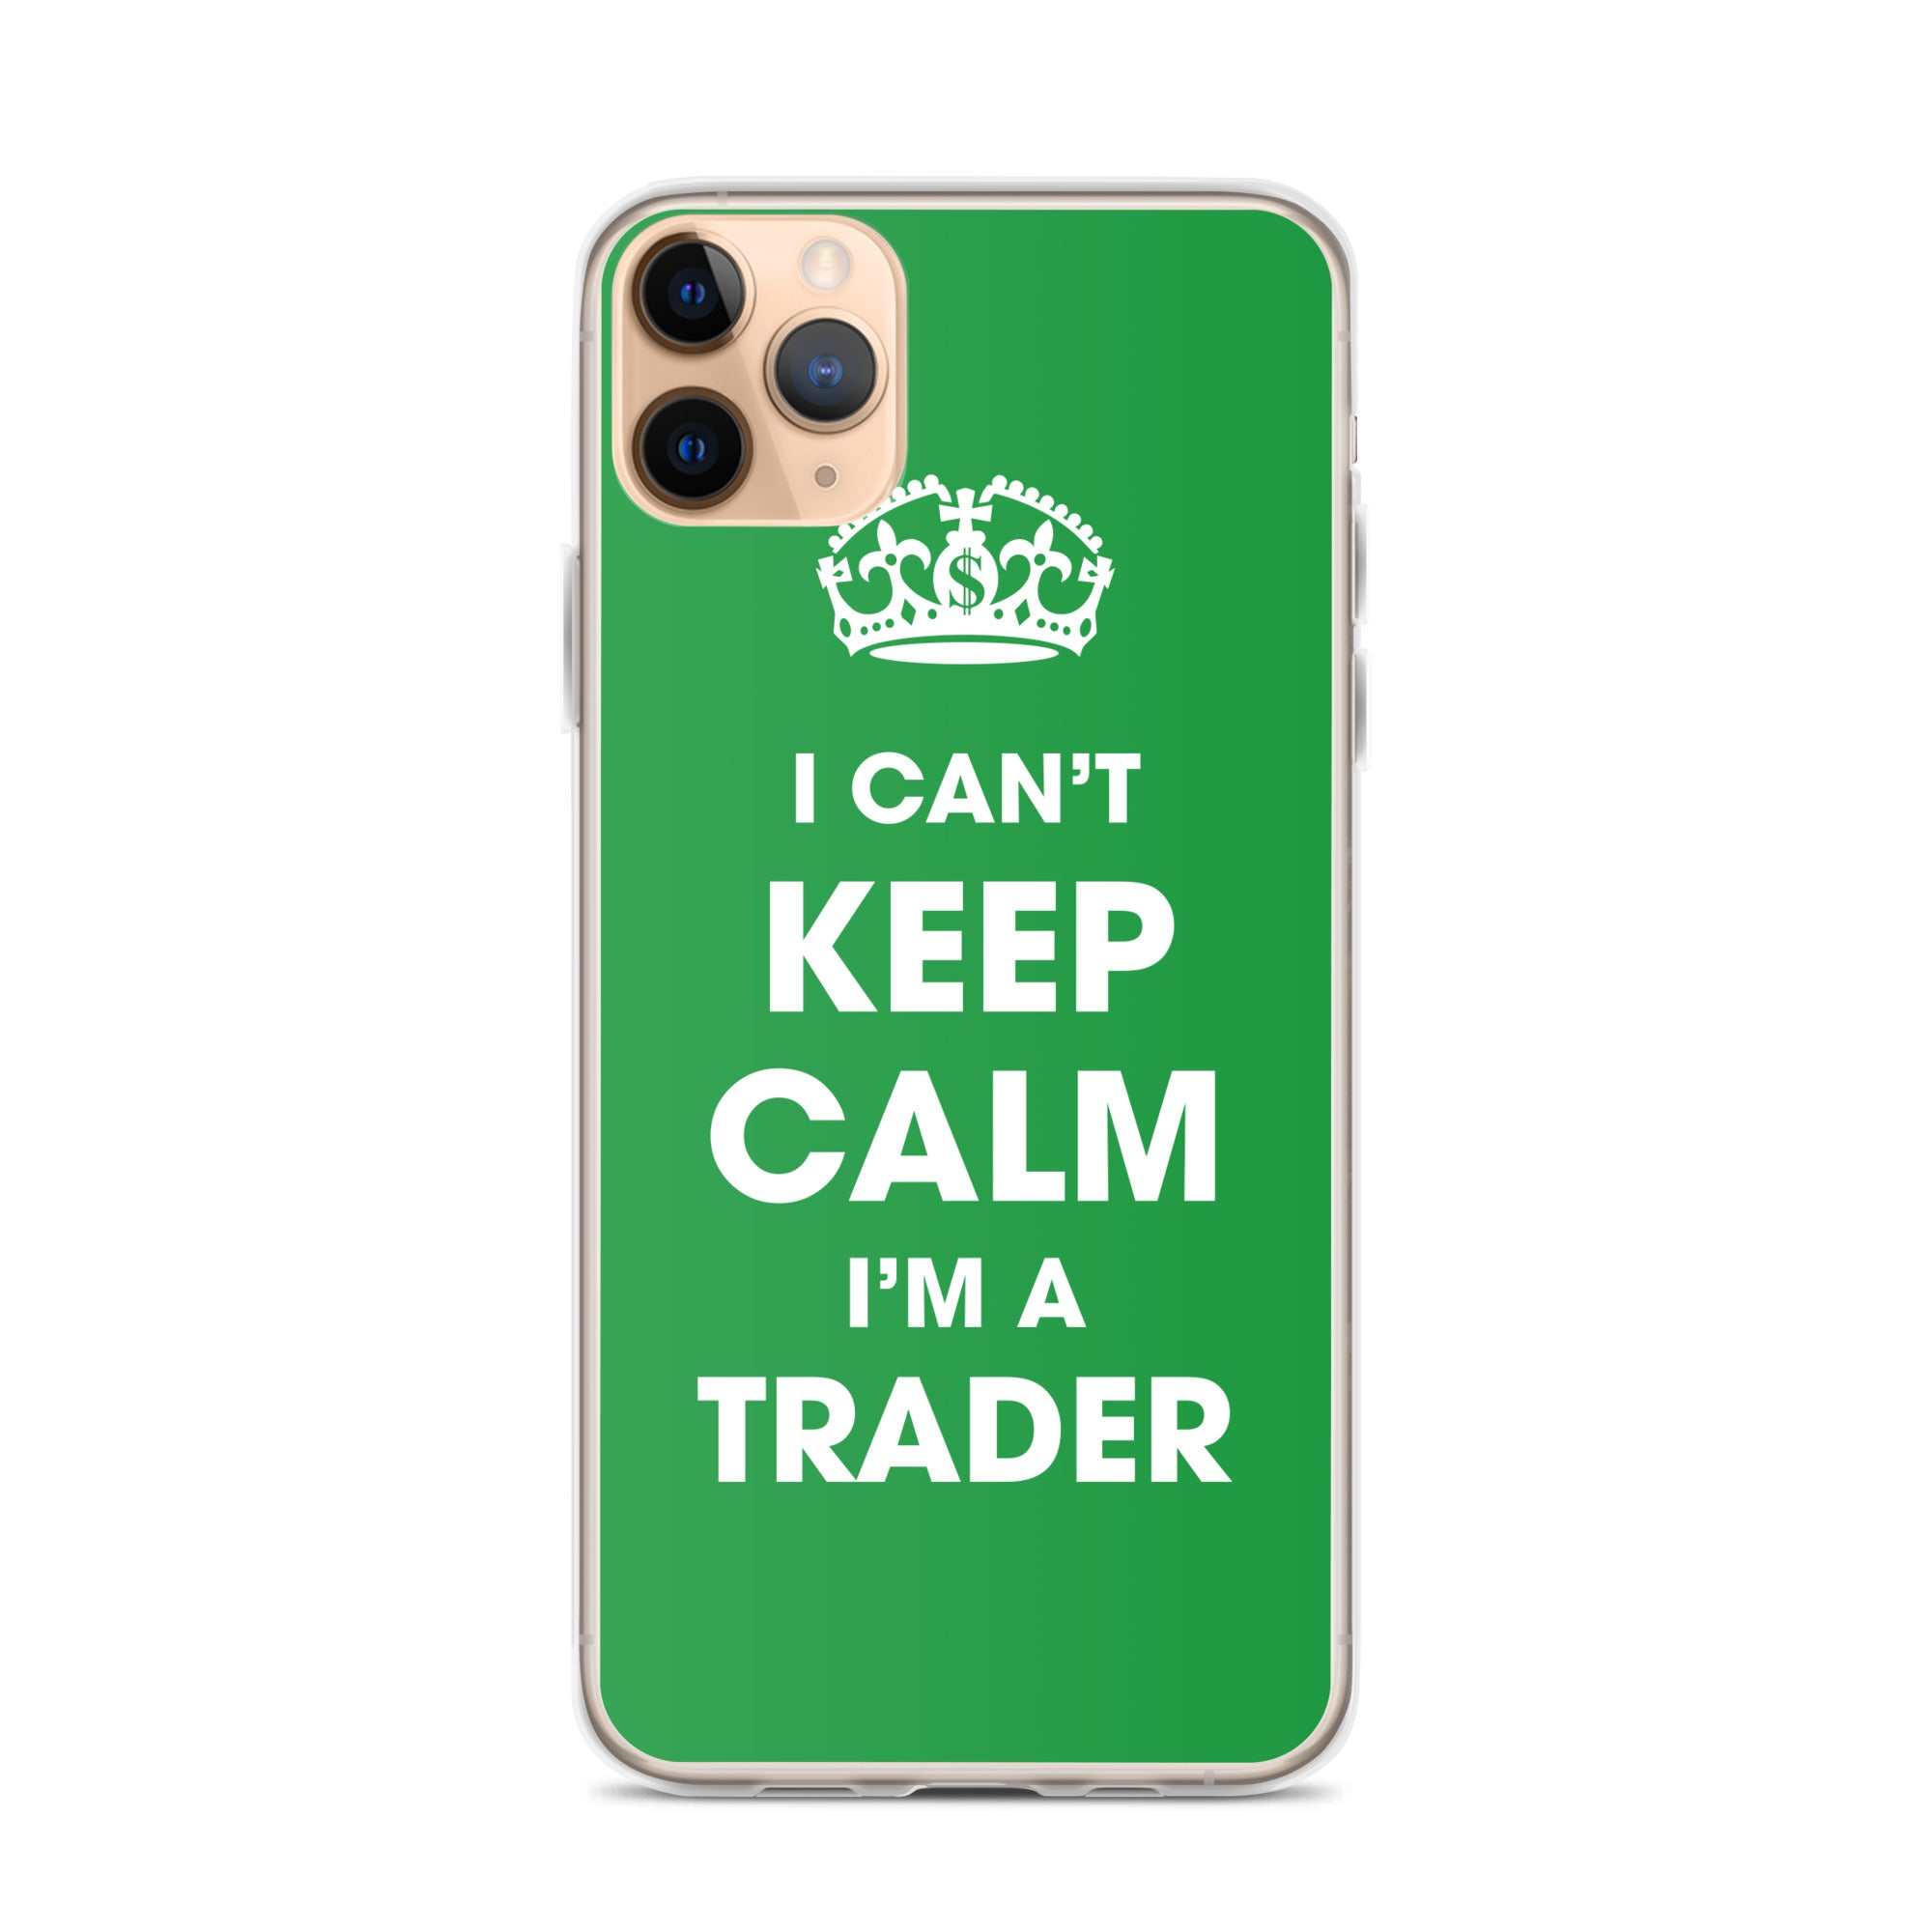 iPhone Case/ Can't Keep Calm - 0